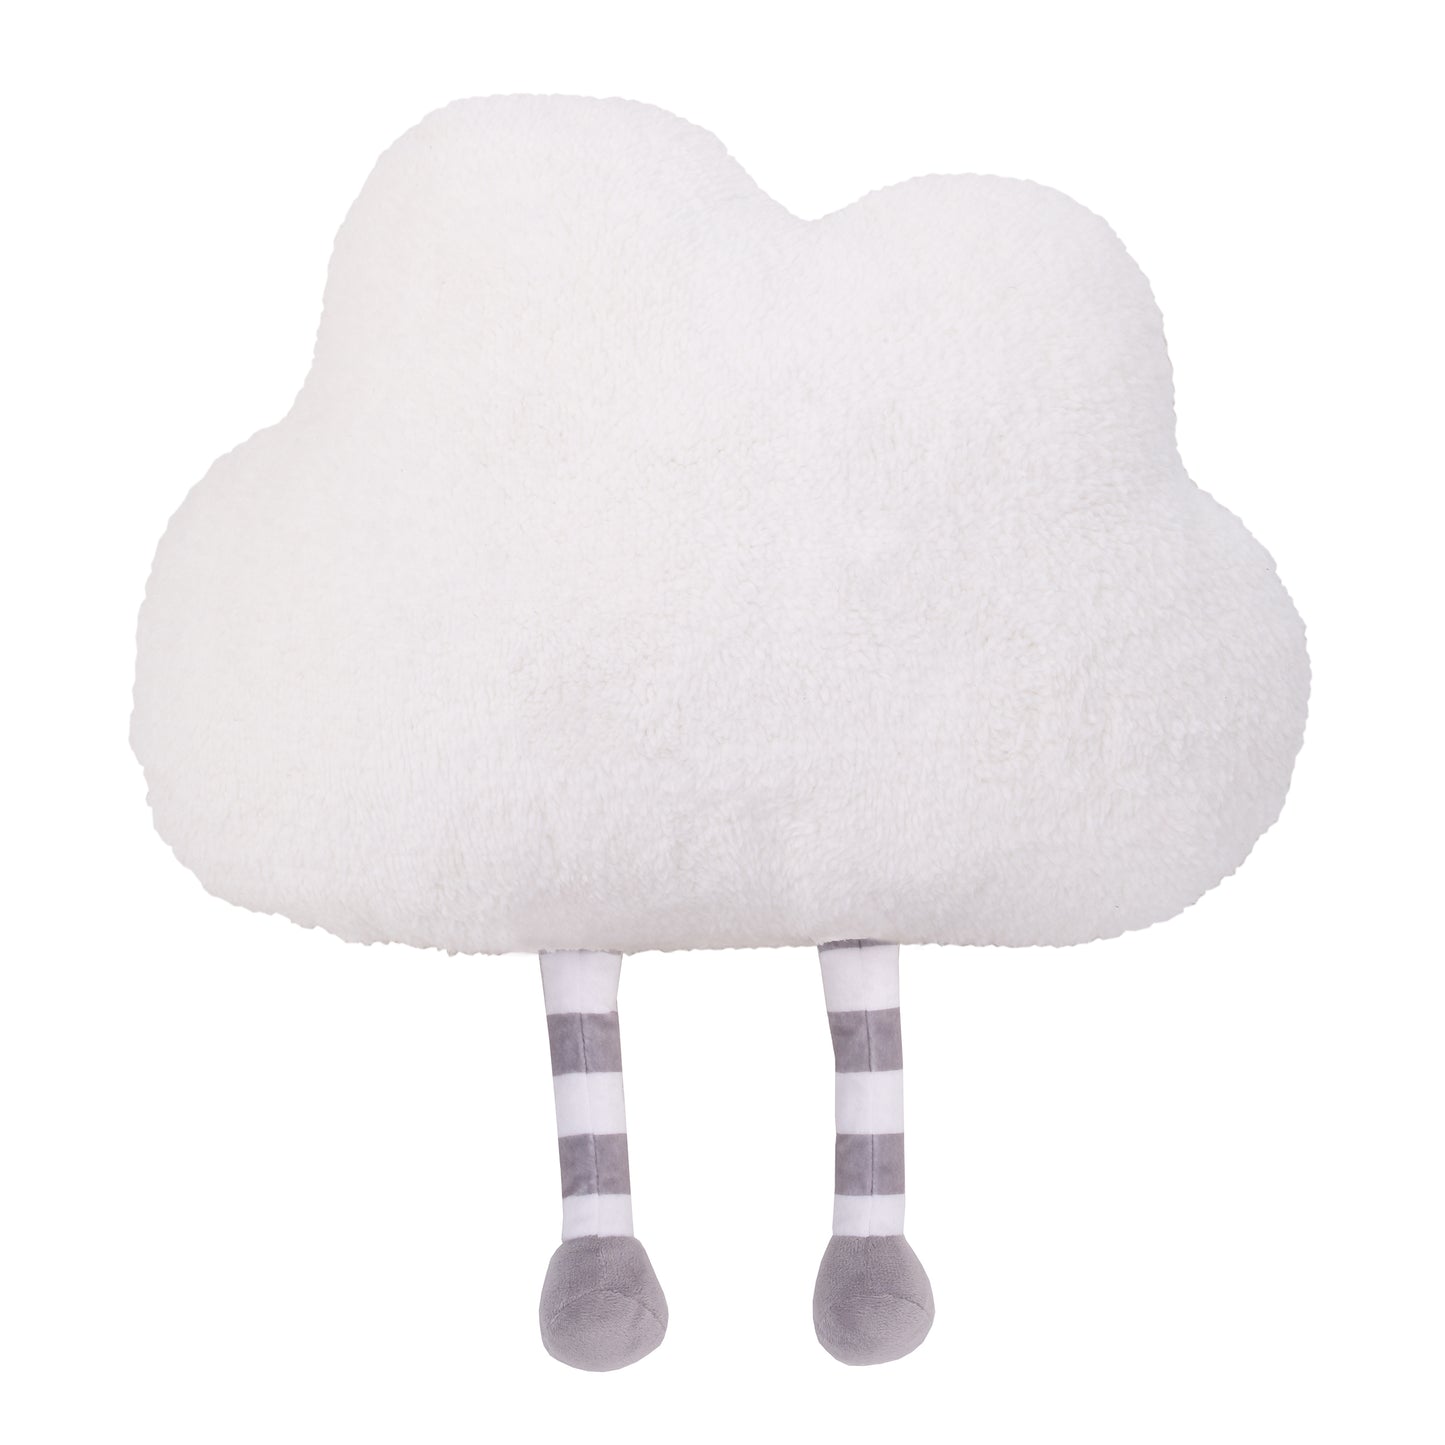 Little Love by NoJo White Cloud with Embroidered Eyes and Smile Grey, White Striped Legs Decorative Shaped Pillow